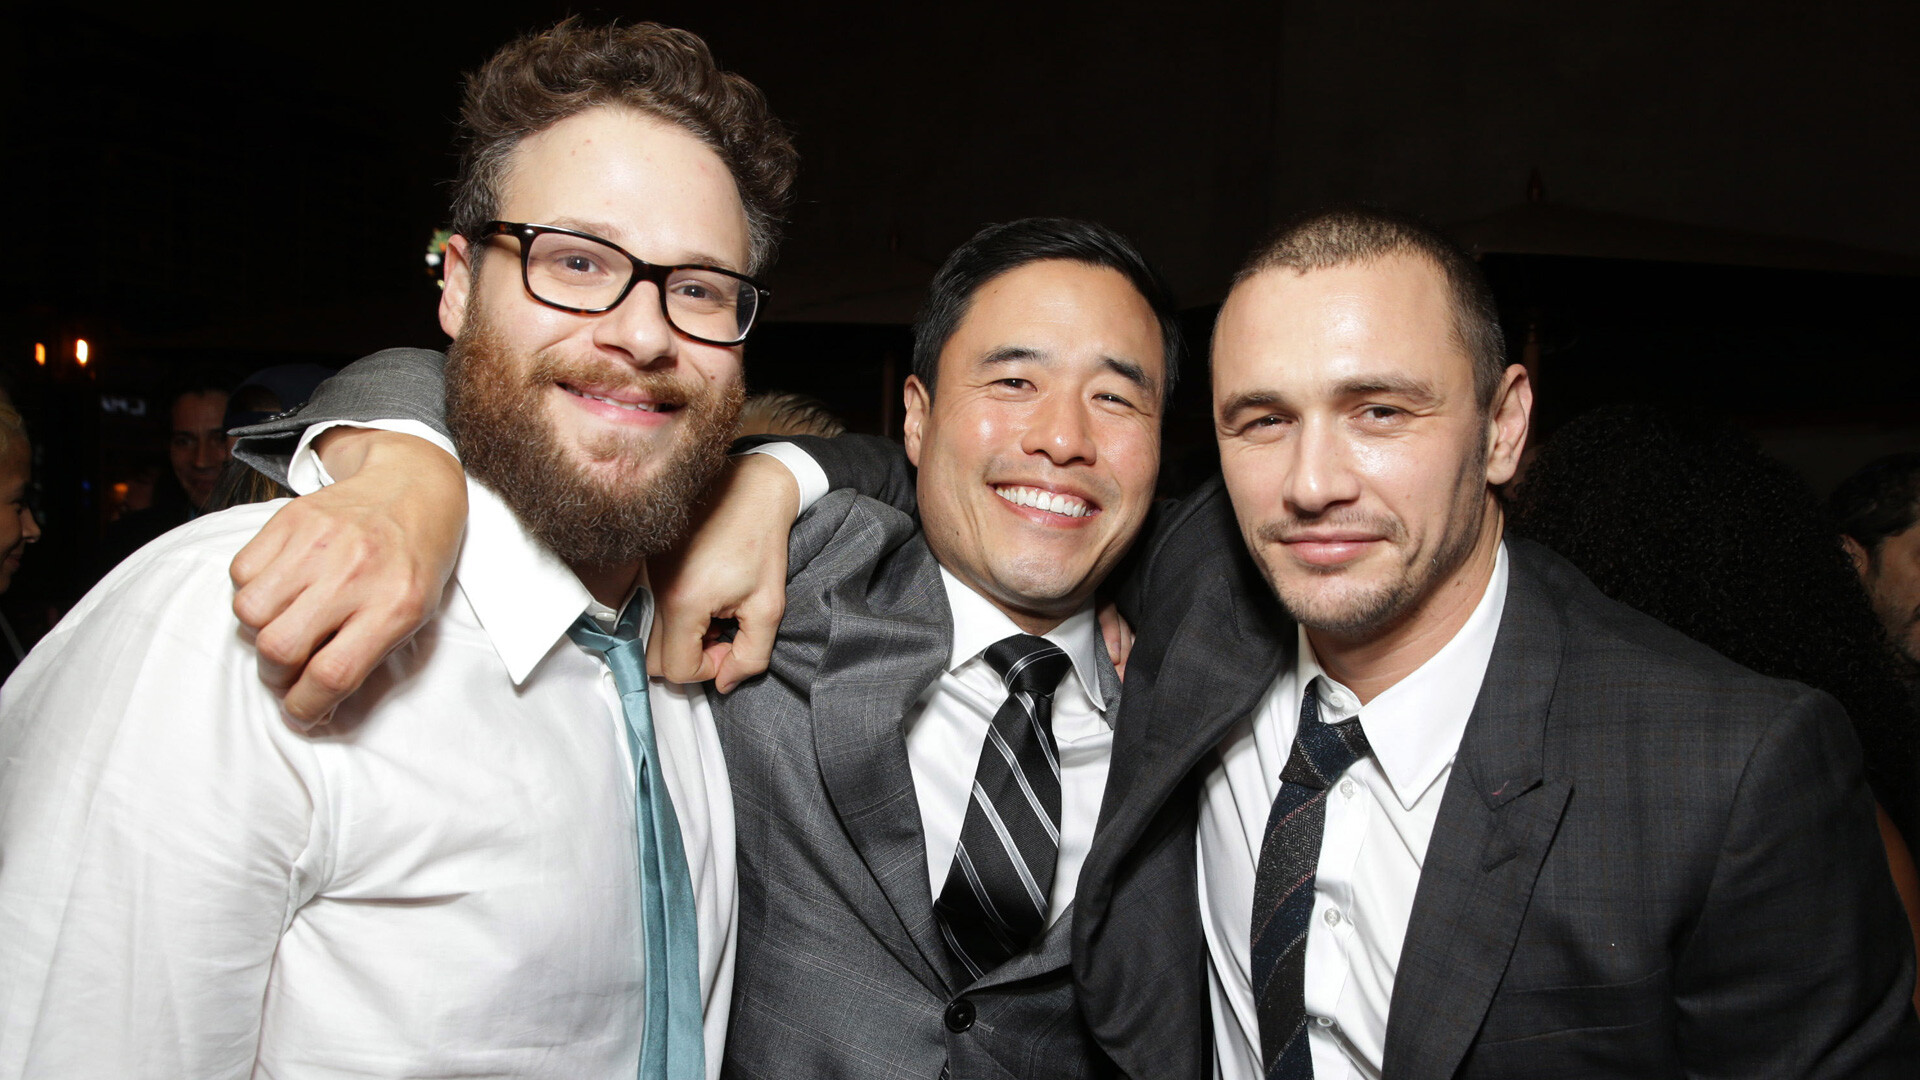 Randall Park: Director Seth Rogen, James Franco, Columbia Pictures World Premiere, "The Interview", 2014, Los Angeles. 1920x1080 Full HD Wallpaper.